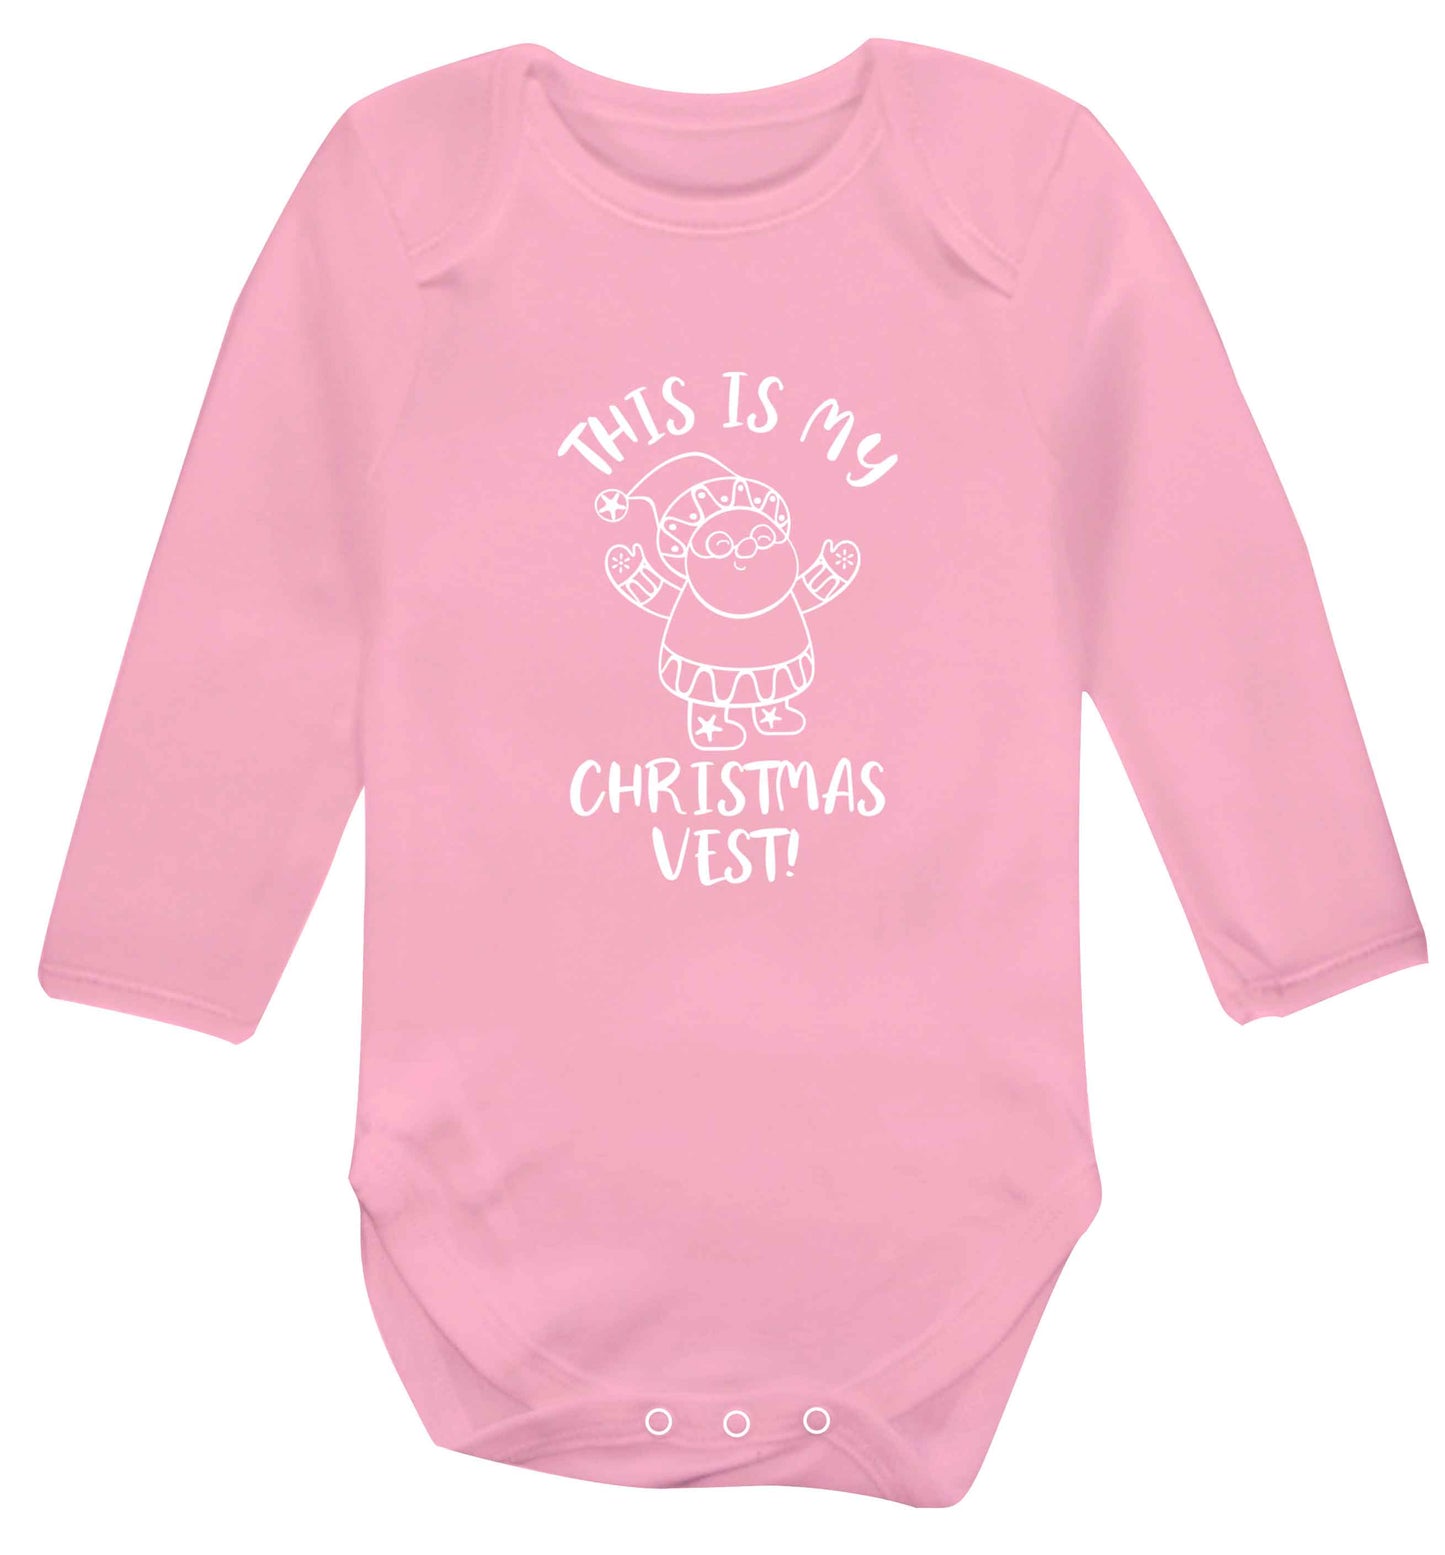 This is my Christmas vest Baby Vest long sleeved pale pink 6-12 months